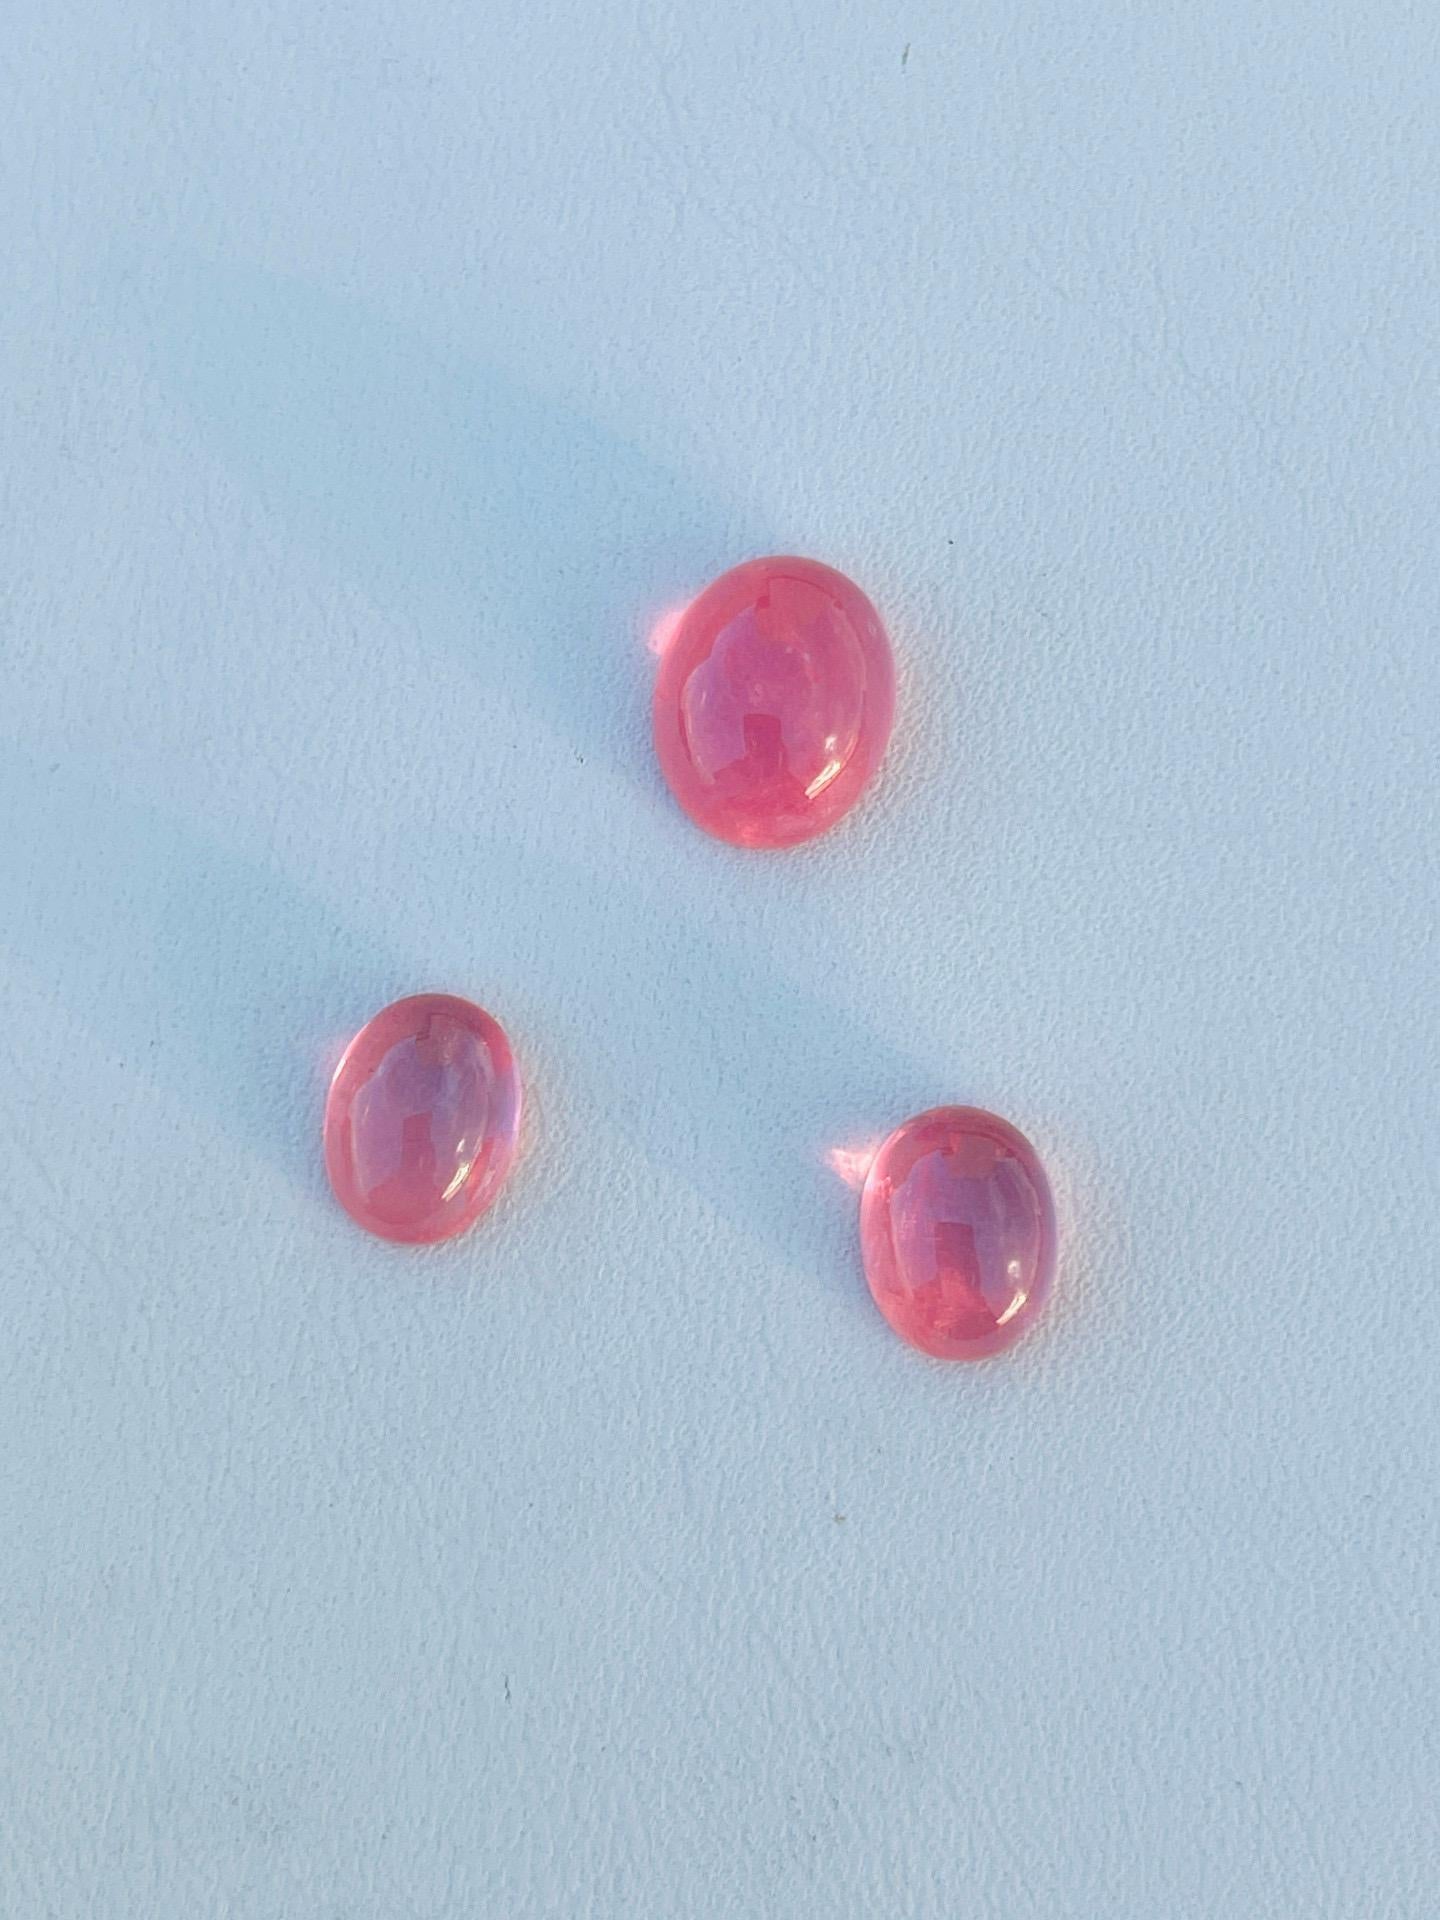 Cabochon Rare Rhodochrosite American cabochon pink transparent crystal collection 10.37ct For Sale